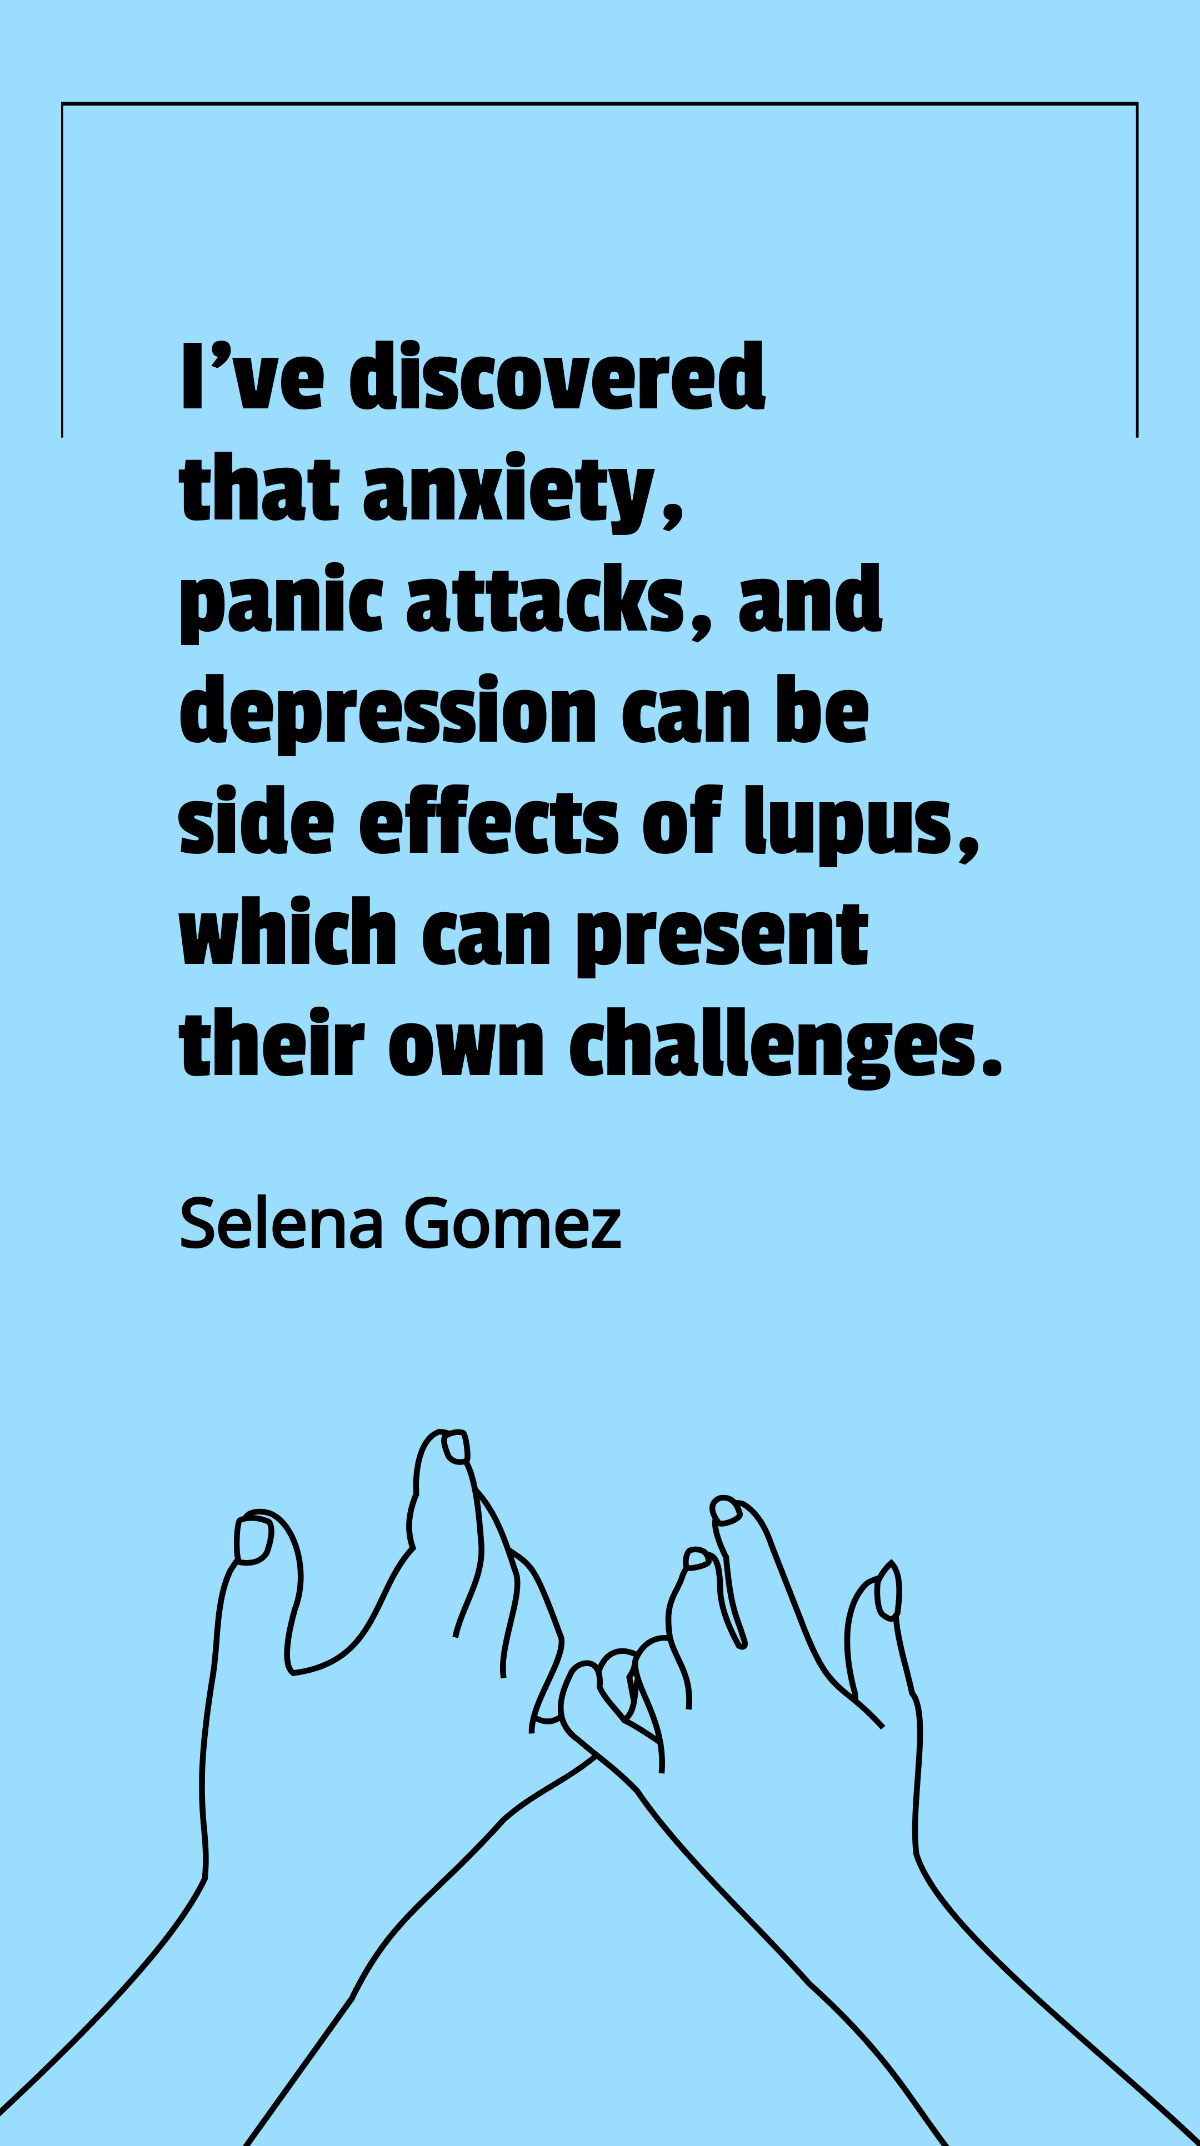 Selena Gomez - I've discovered that anxiety, panic attacks, and depression can be side effects of lupus, which can present their own challenges. Template